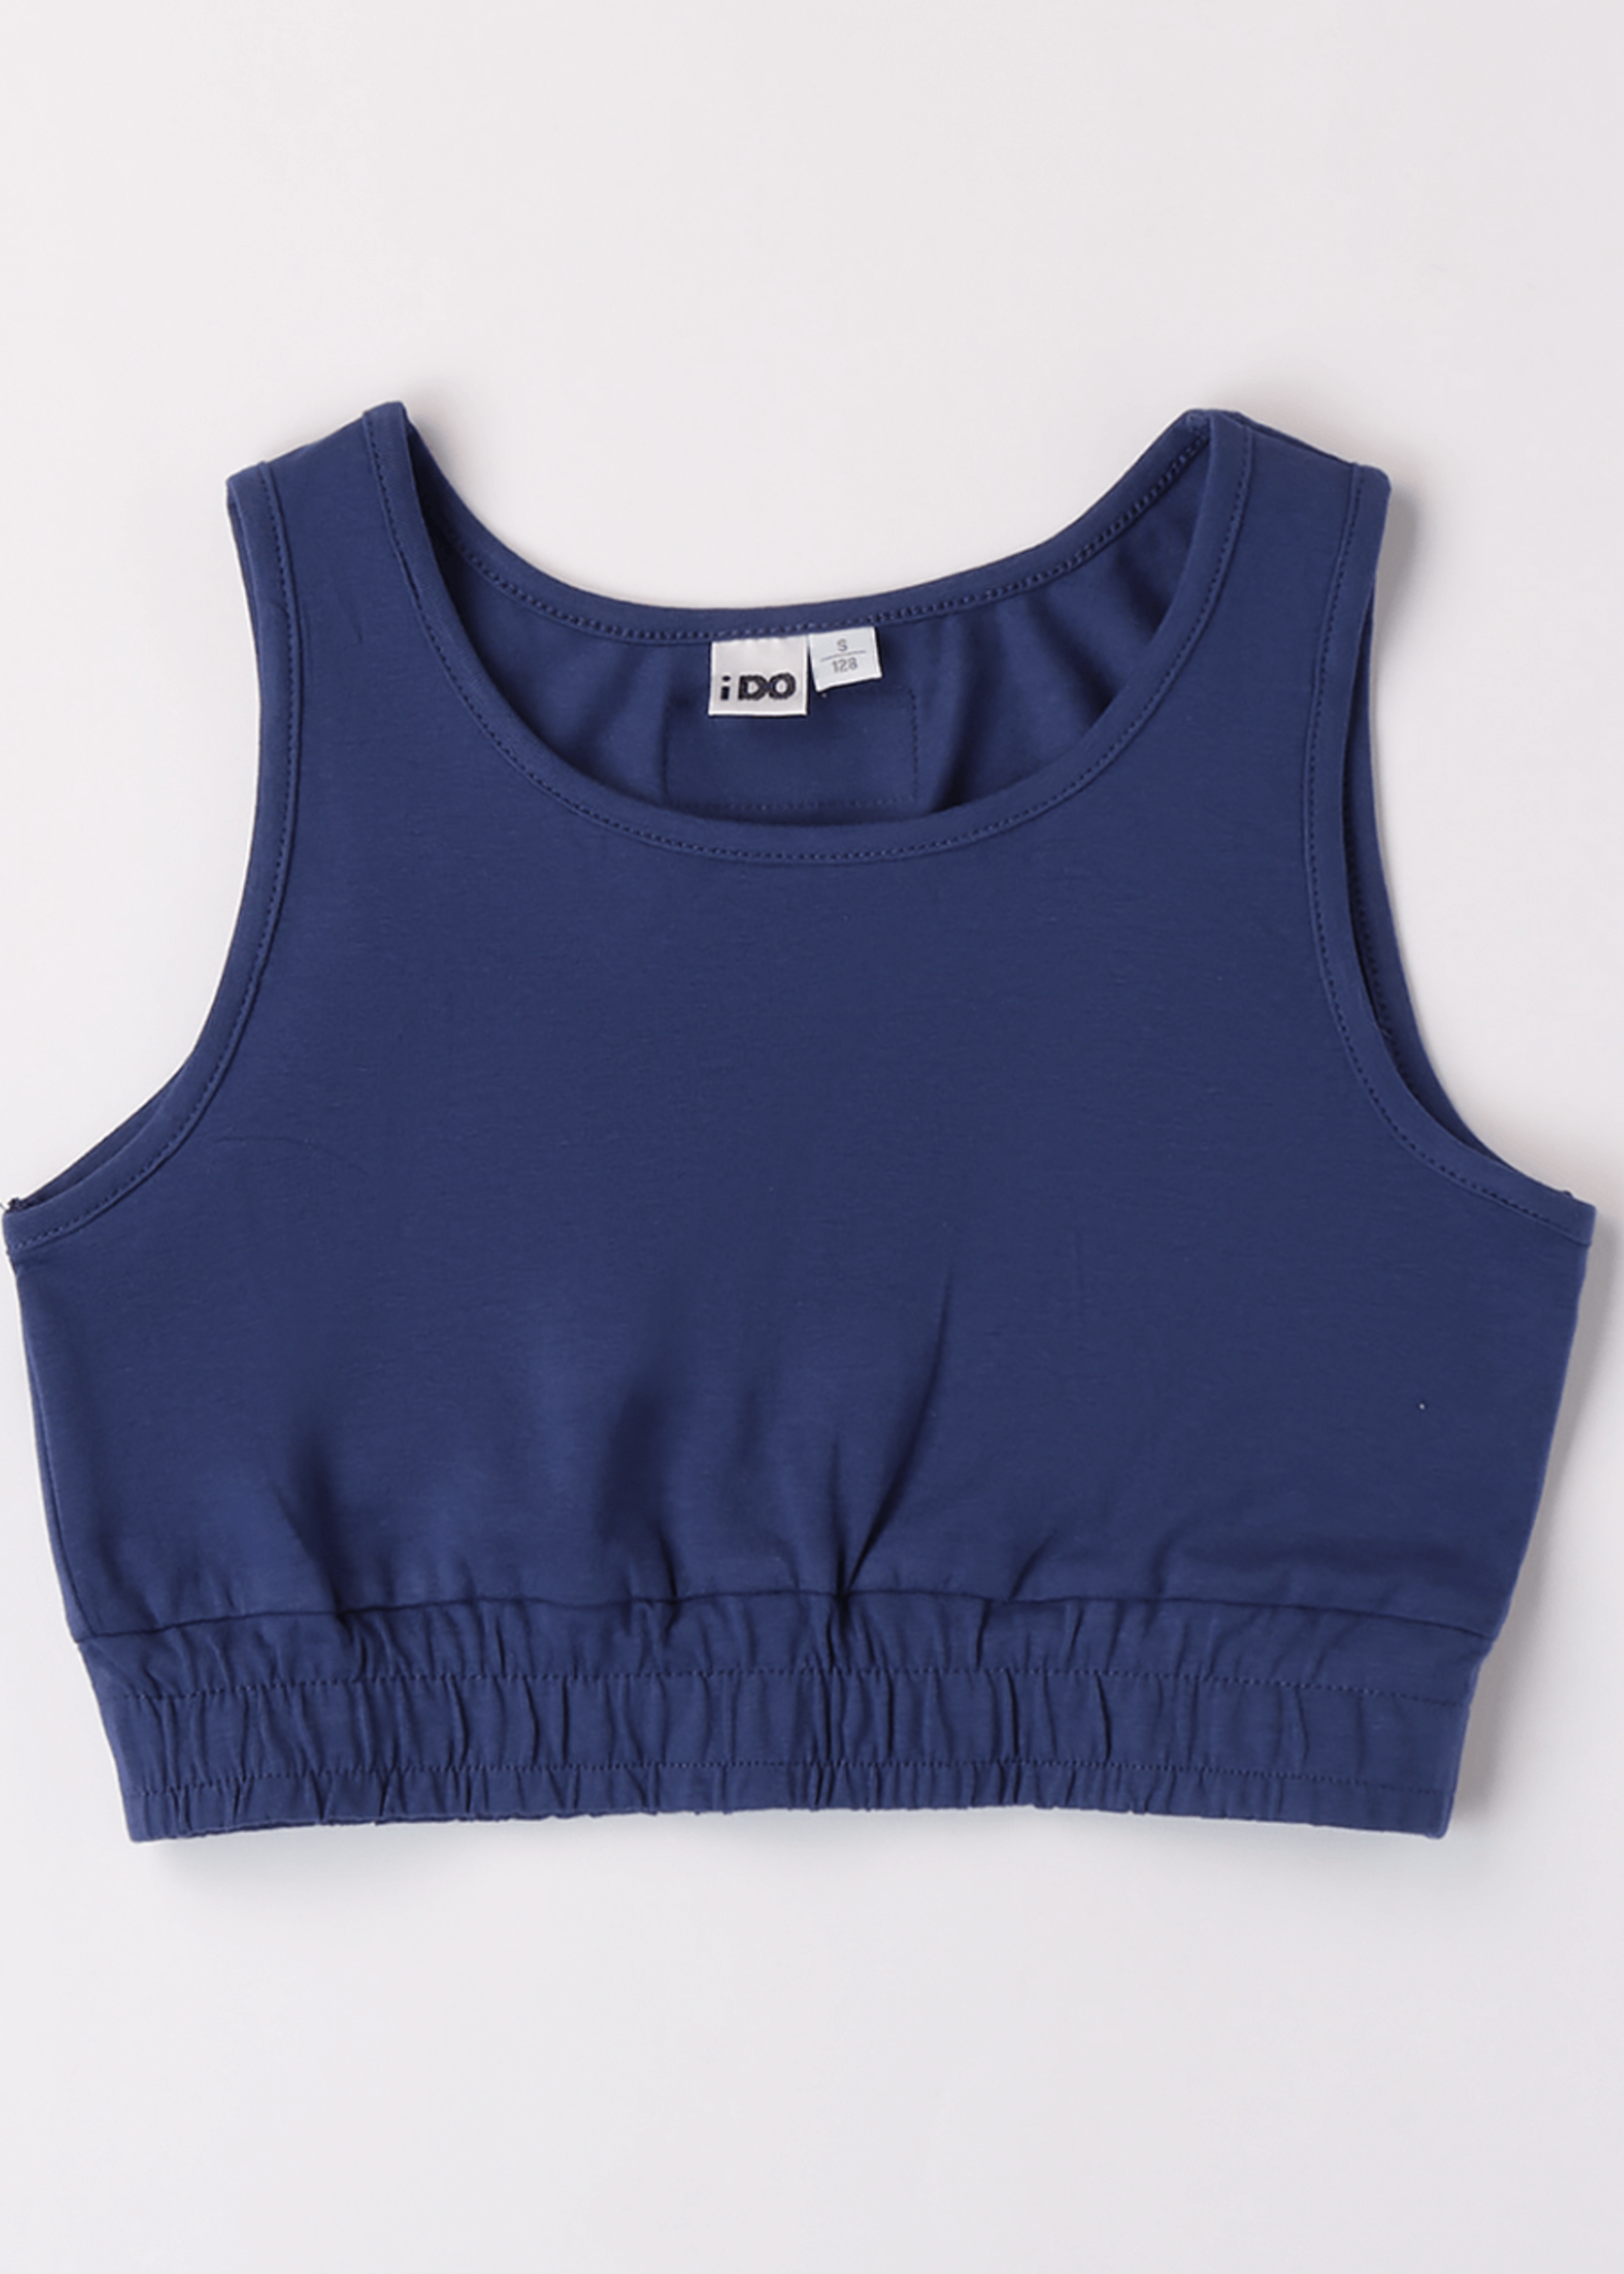 iDO Cropped Top Blue